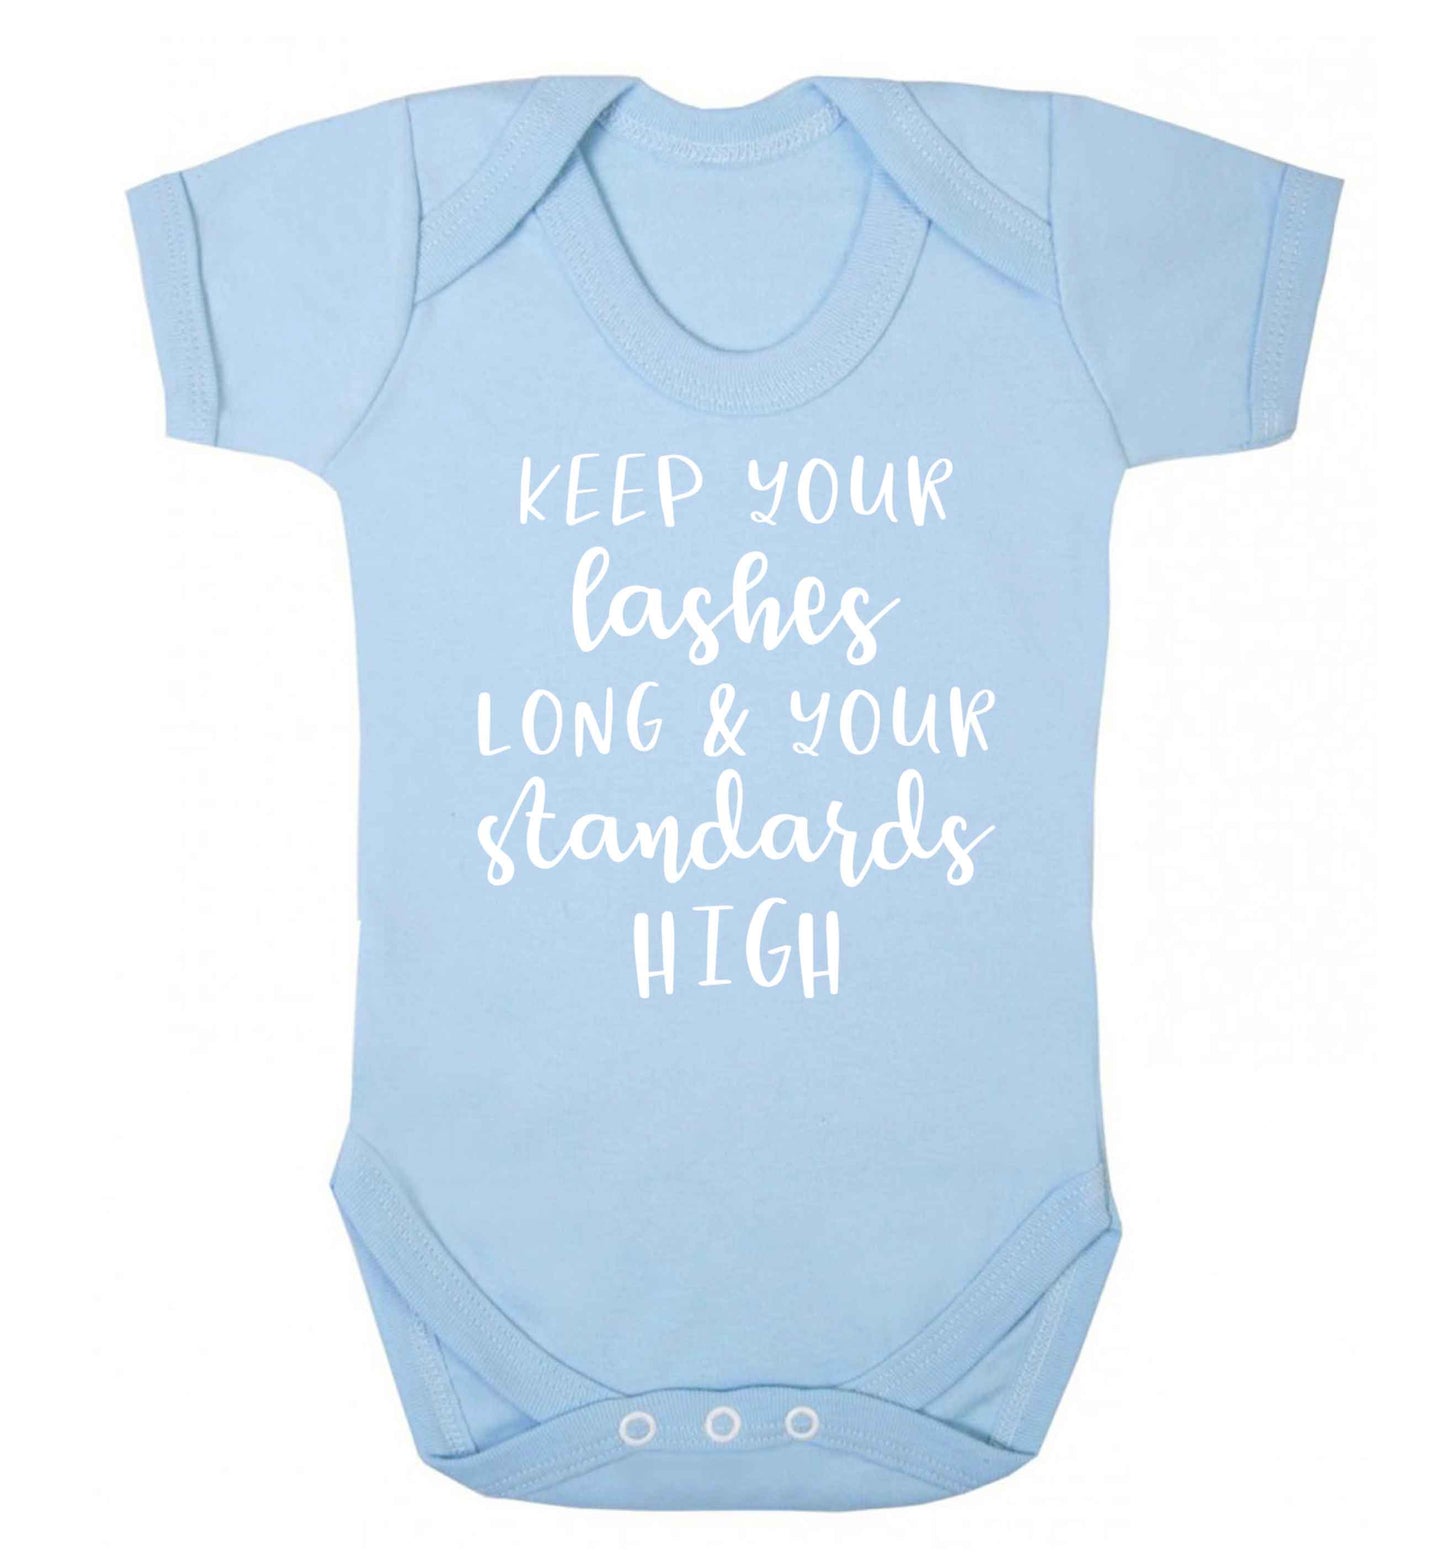 Keep your lashes long and your standards high Baby Vest pale blue 18-24 months